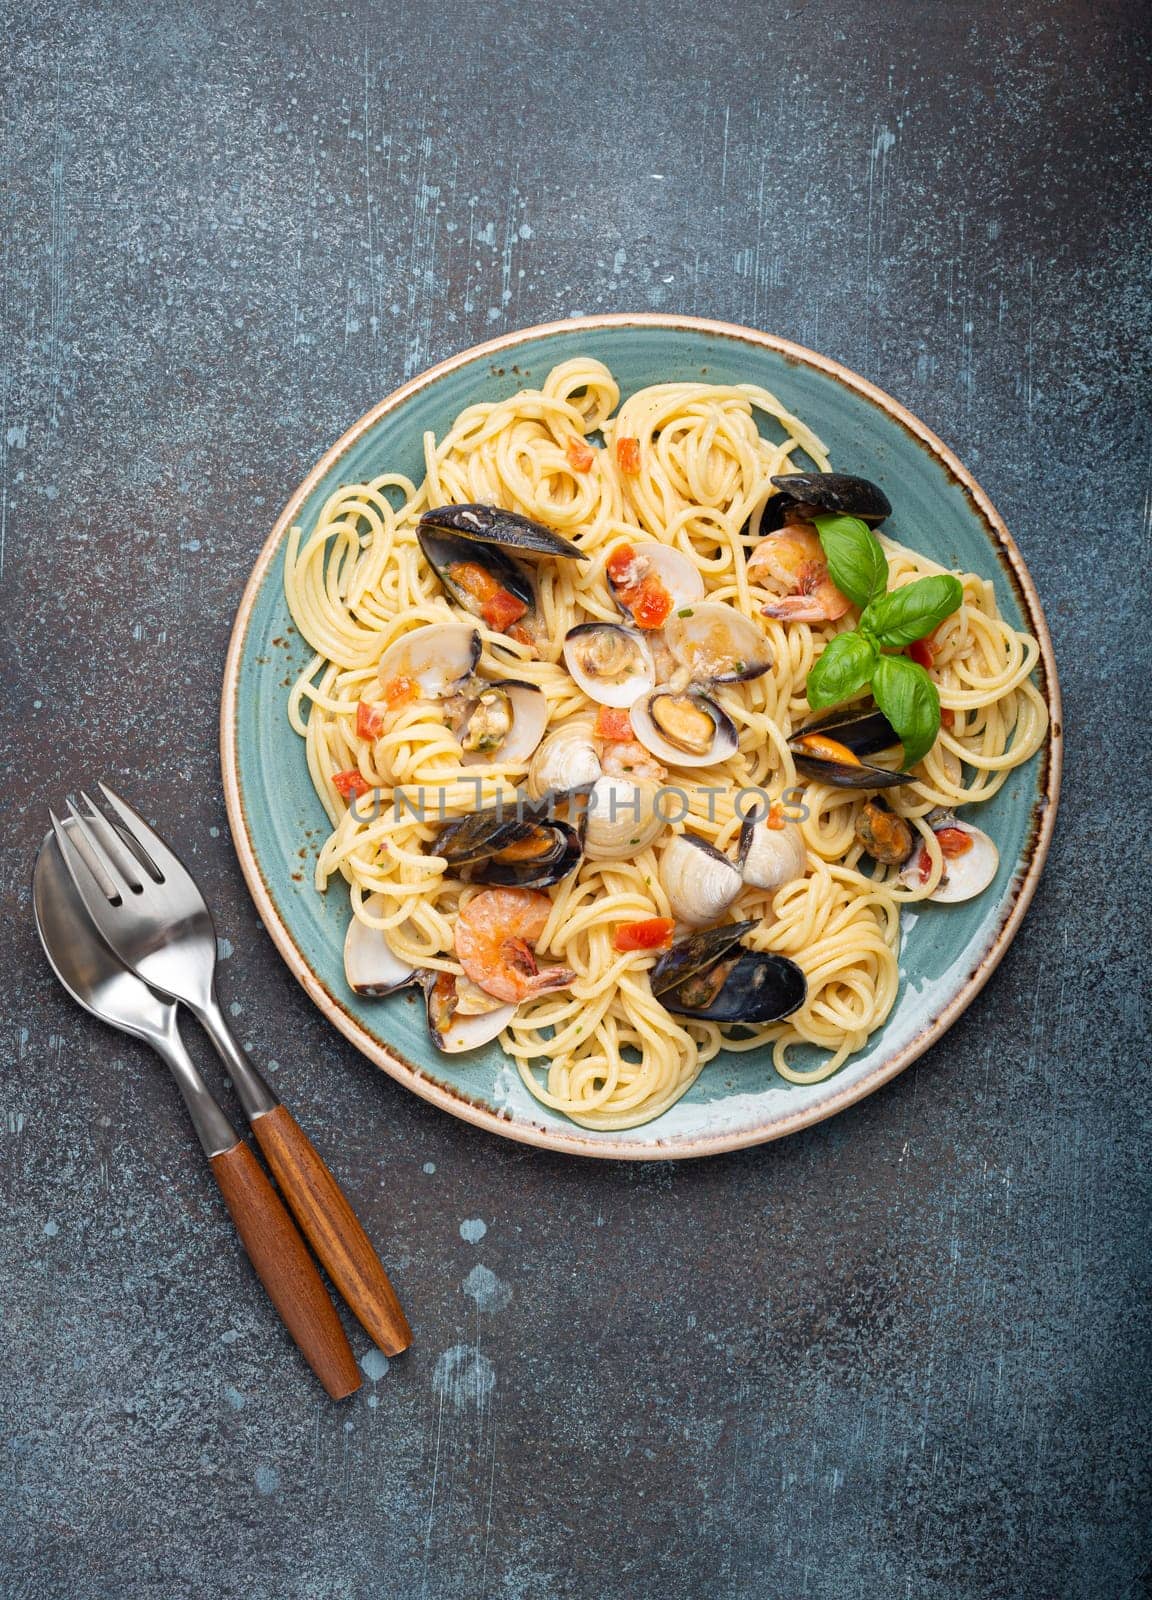 Italian seafood pasta spaghetti with mussels, shrimps, clams in tomato sauce with green basil on plate on rustic blue concrete background overhead. Mediterranean cuisine